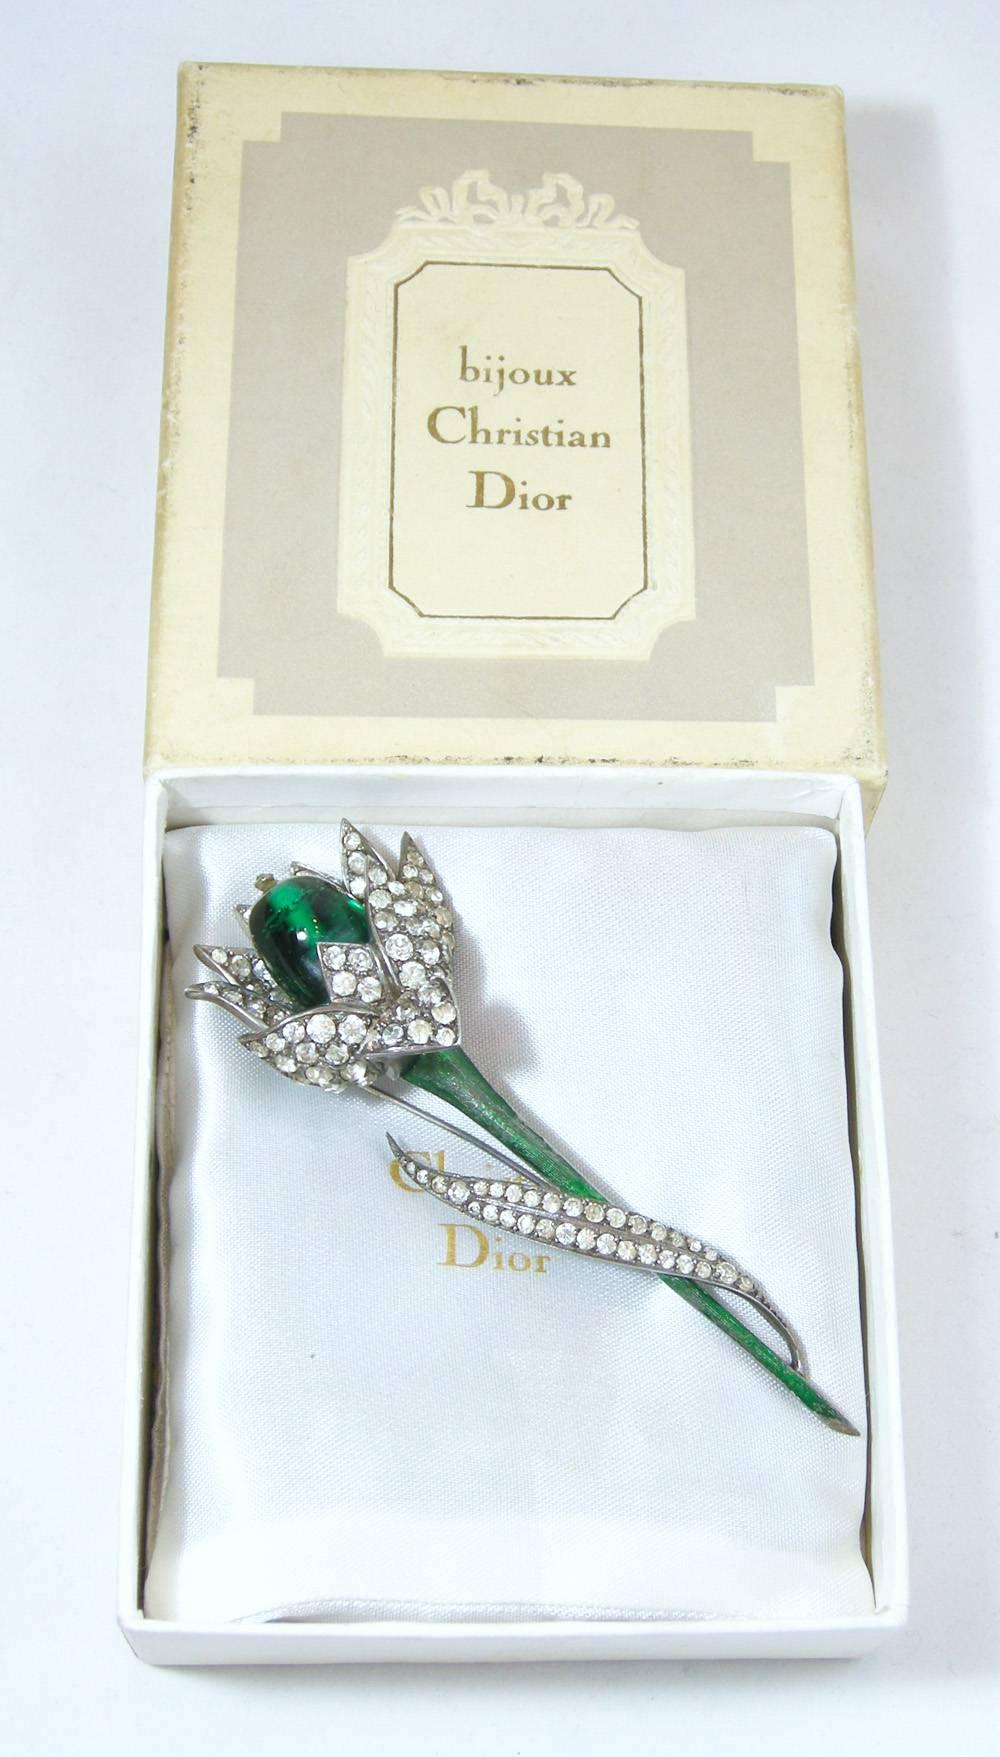 This is a very rare 1960s Dior flower brooch in its original box and dust cover.  It is 4” high and 1-3/4” wide.  The stem is green enamel and the branch and flower petals are crystals with a Green Gripoix center in the flower.  This brooch has been